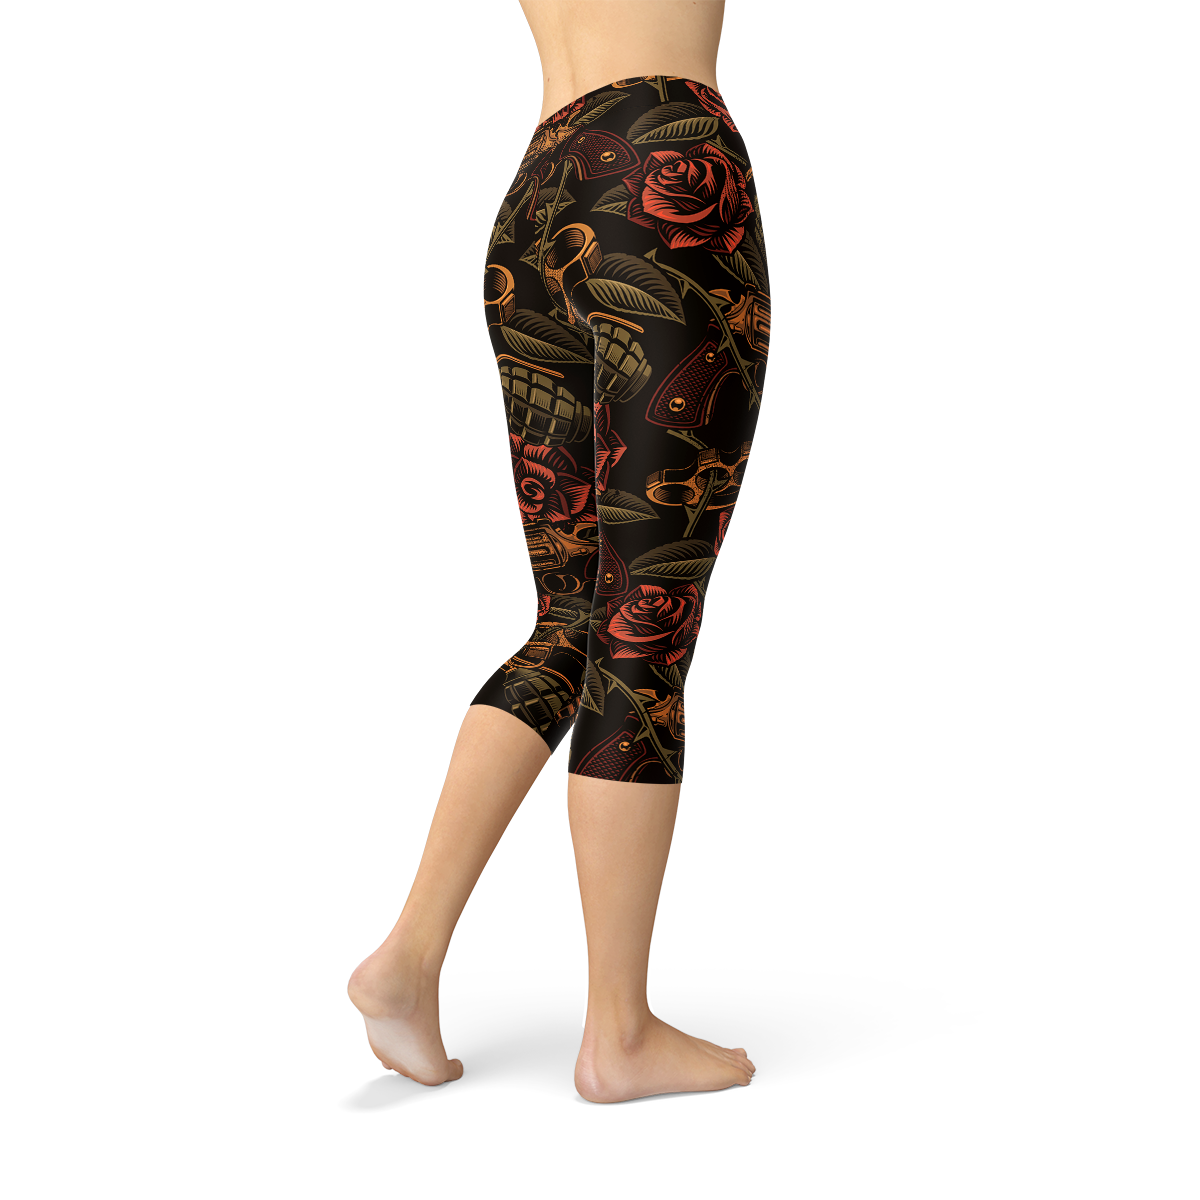 Women's High-Waisted Classic Leggings - Wild Fable Dark Brown Floral Size  Small | eBay